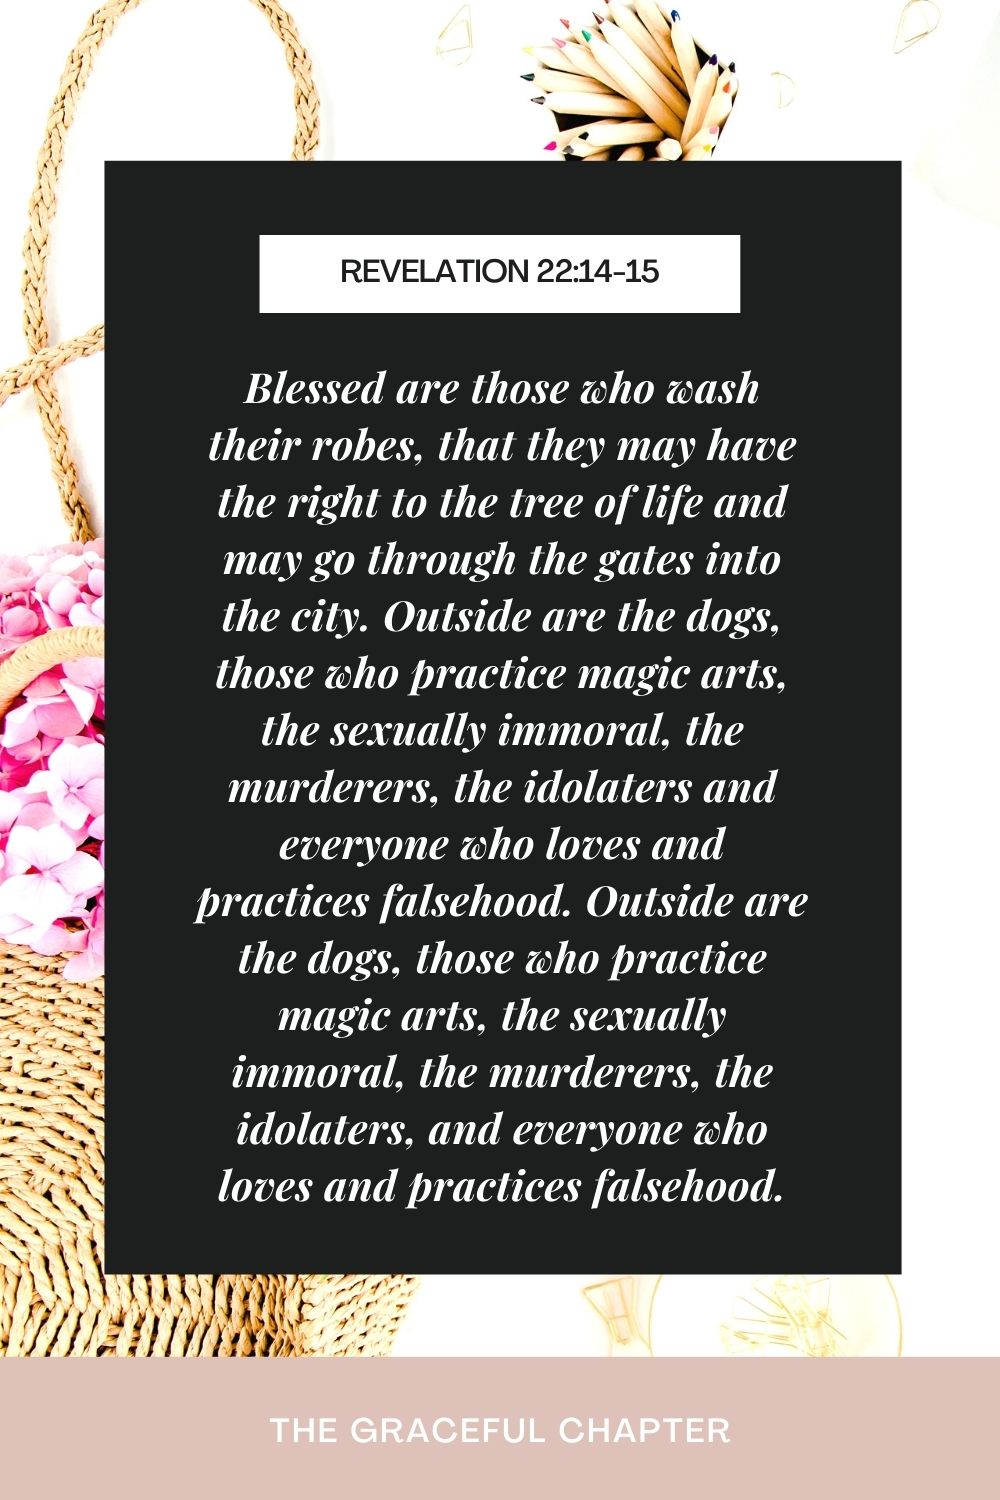 Revelation 22:14-15 bible verses about fornication